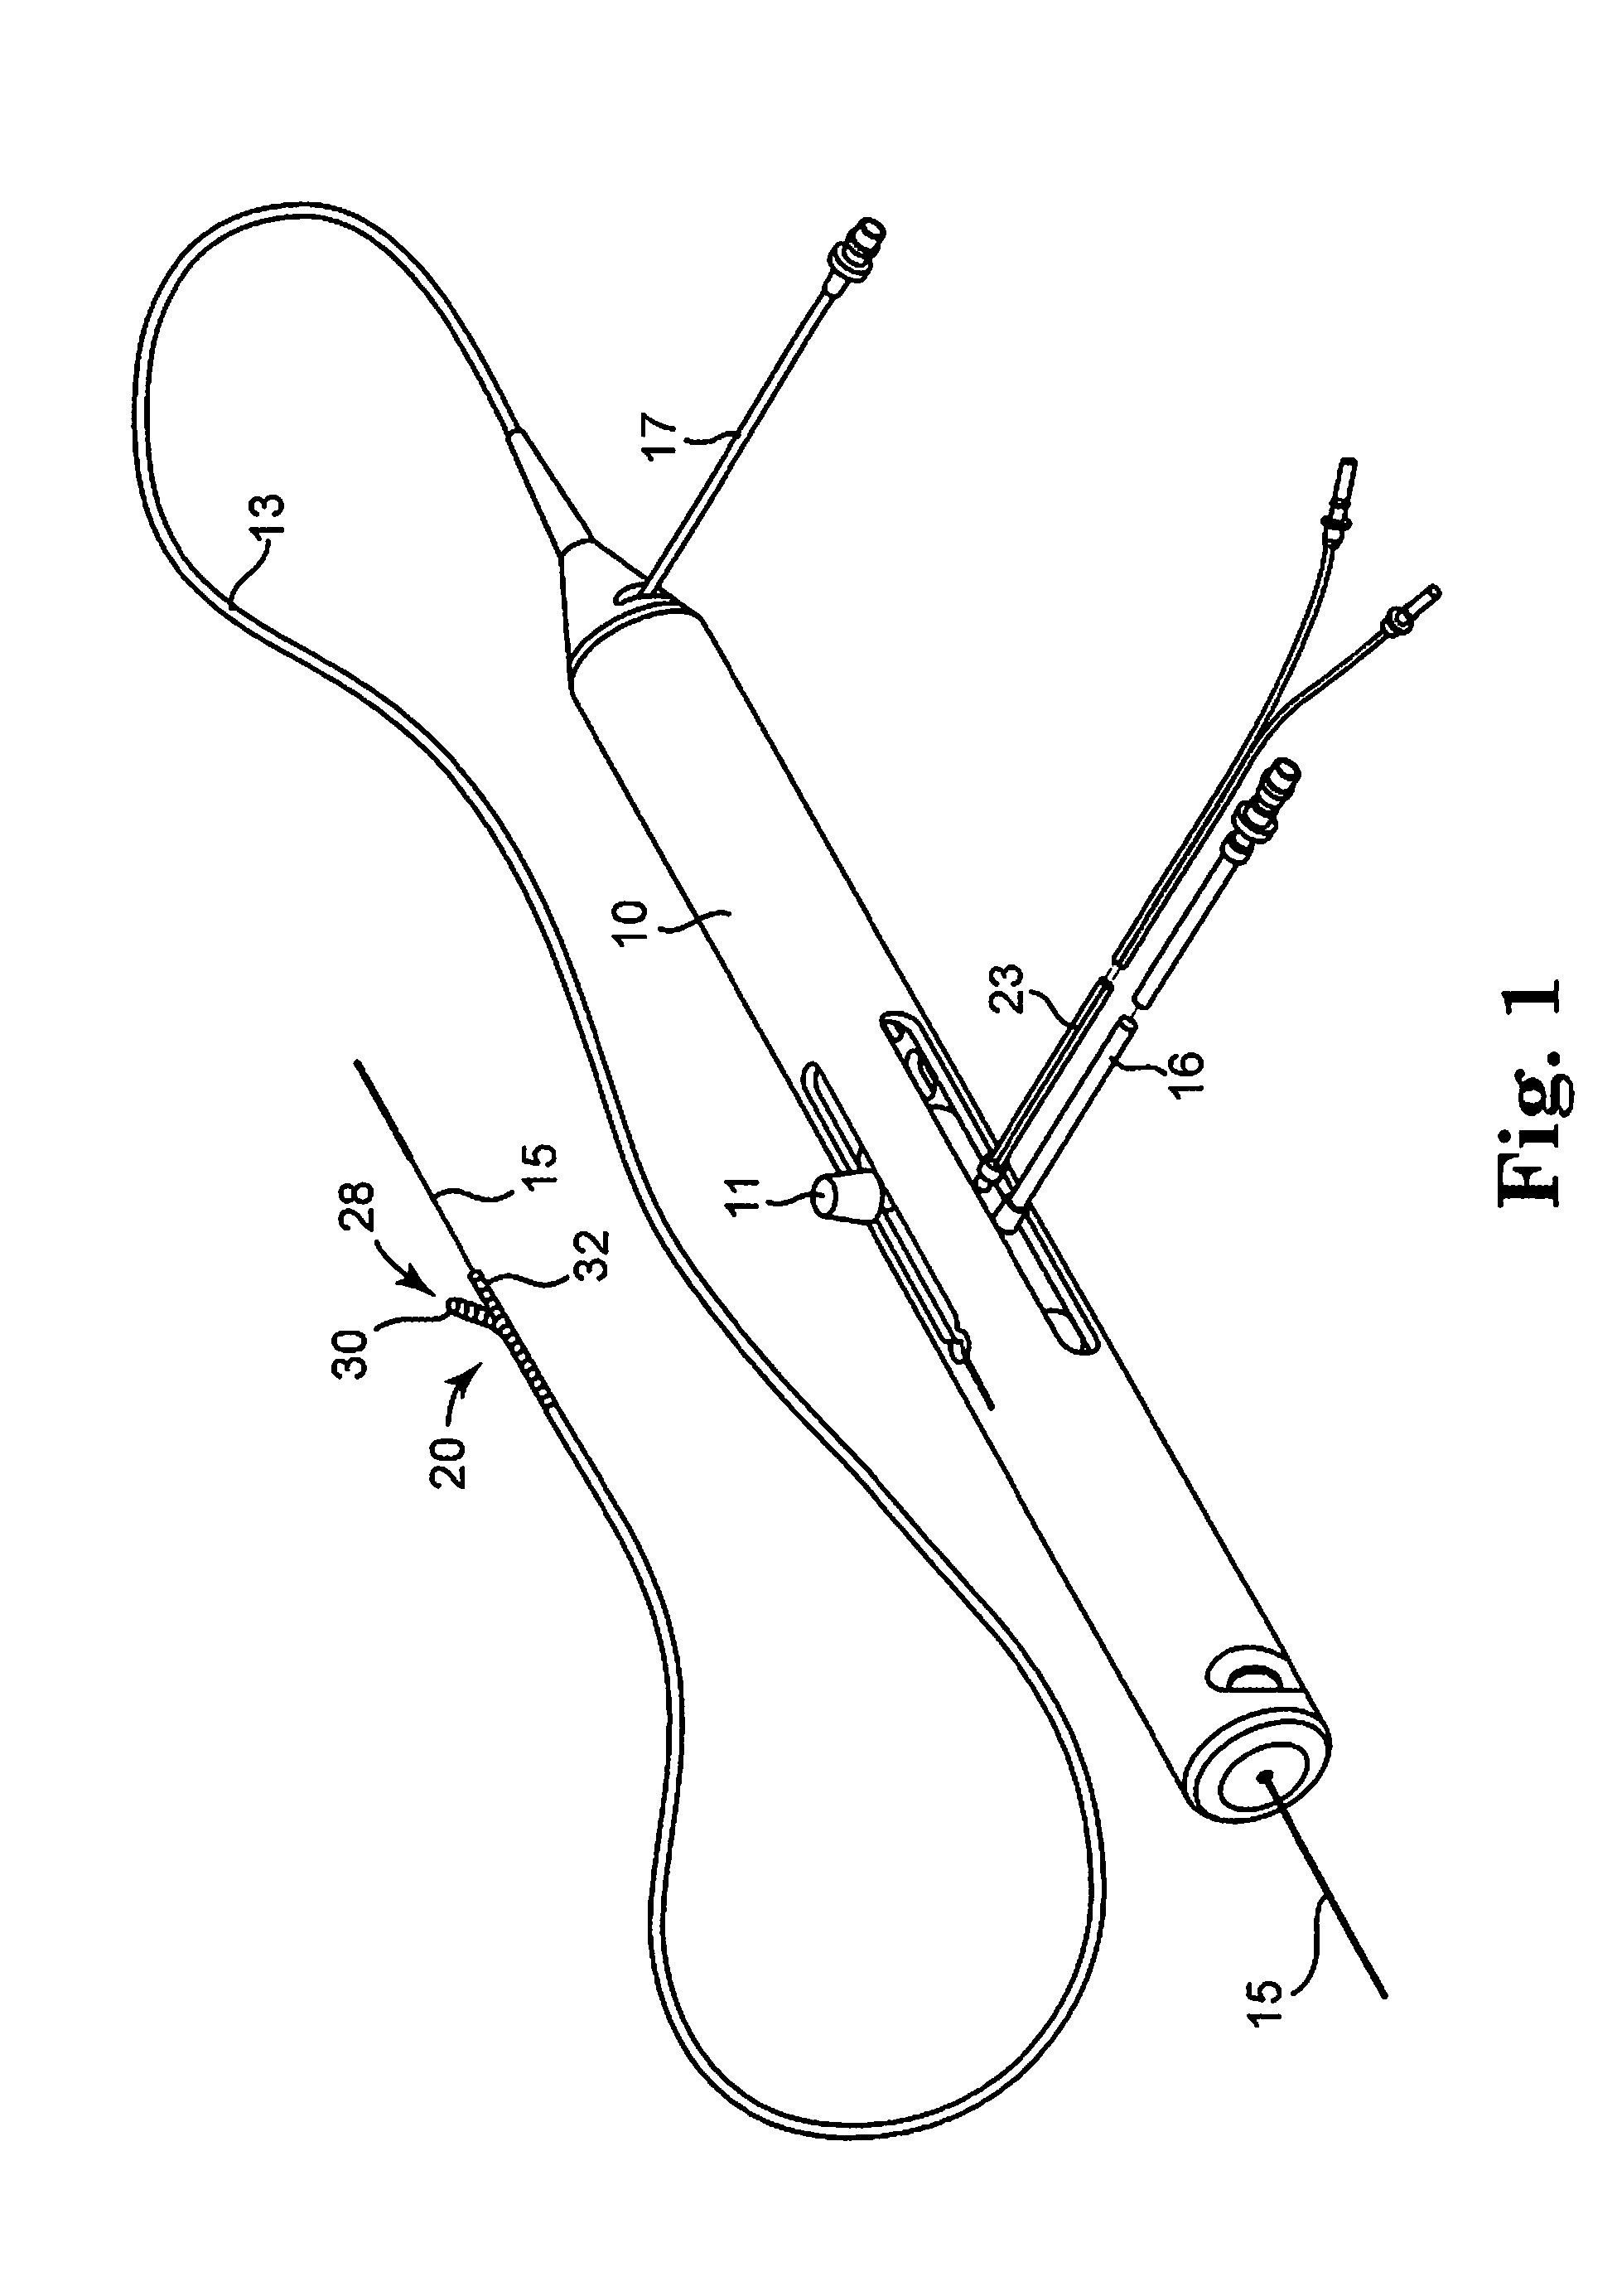 Split flexible tube biasing and directional atherectomy device and method